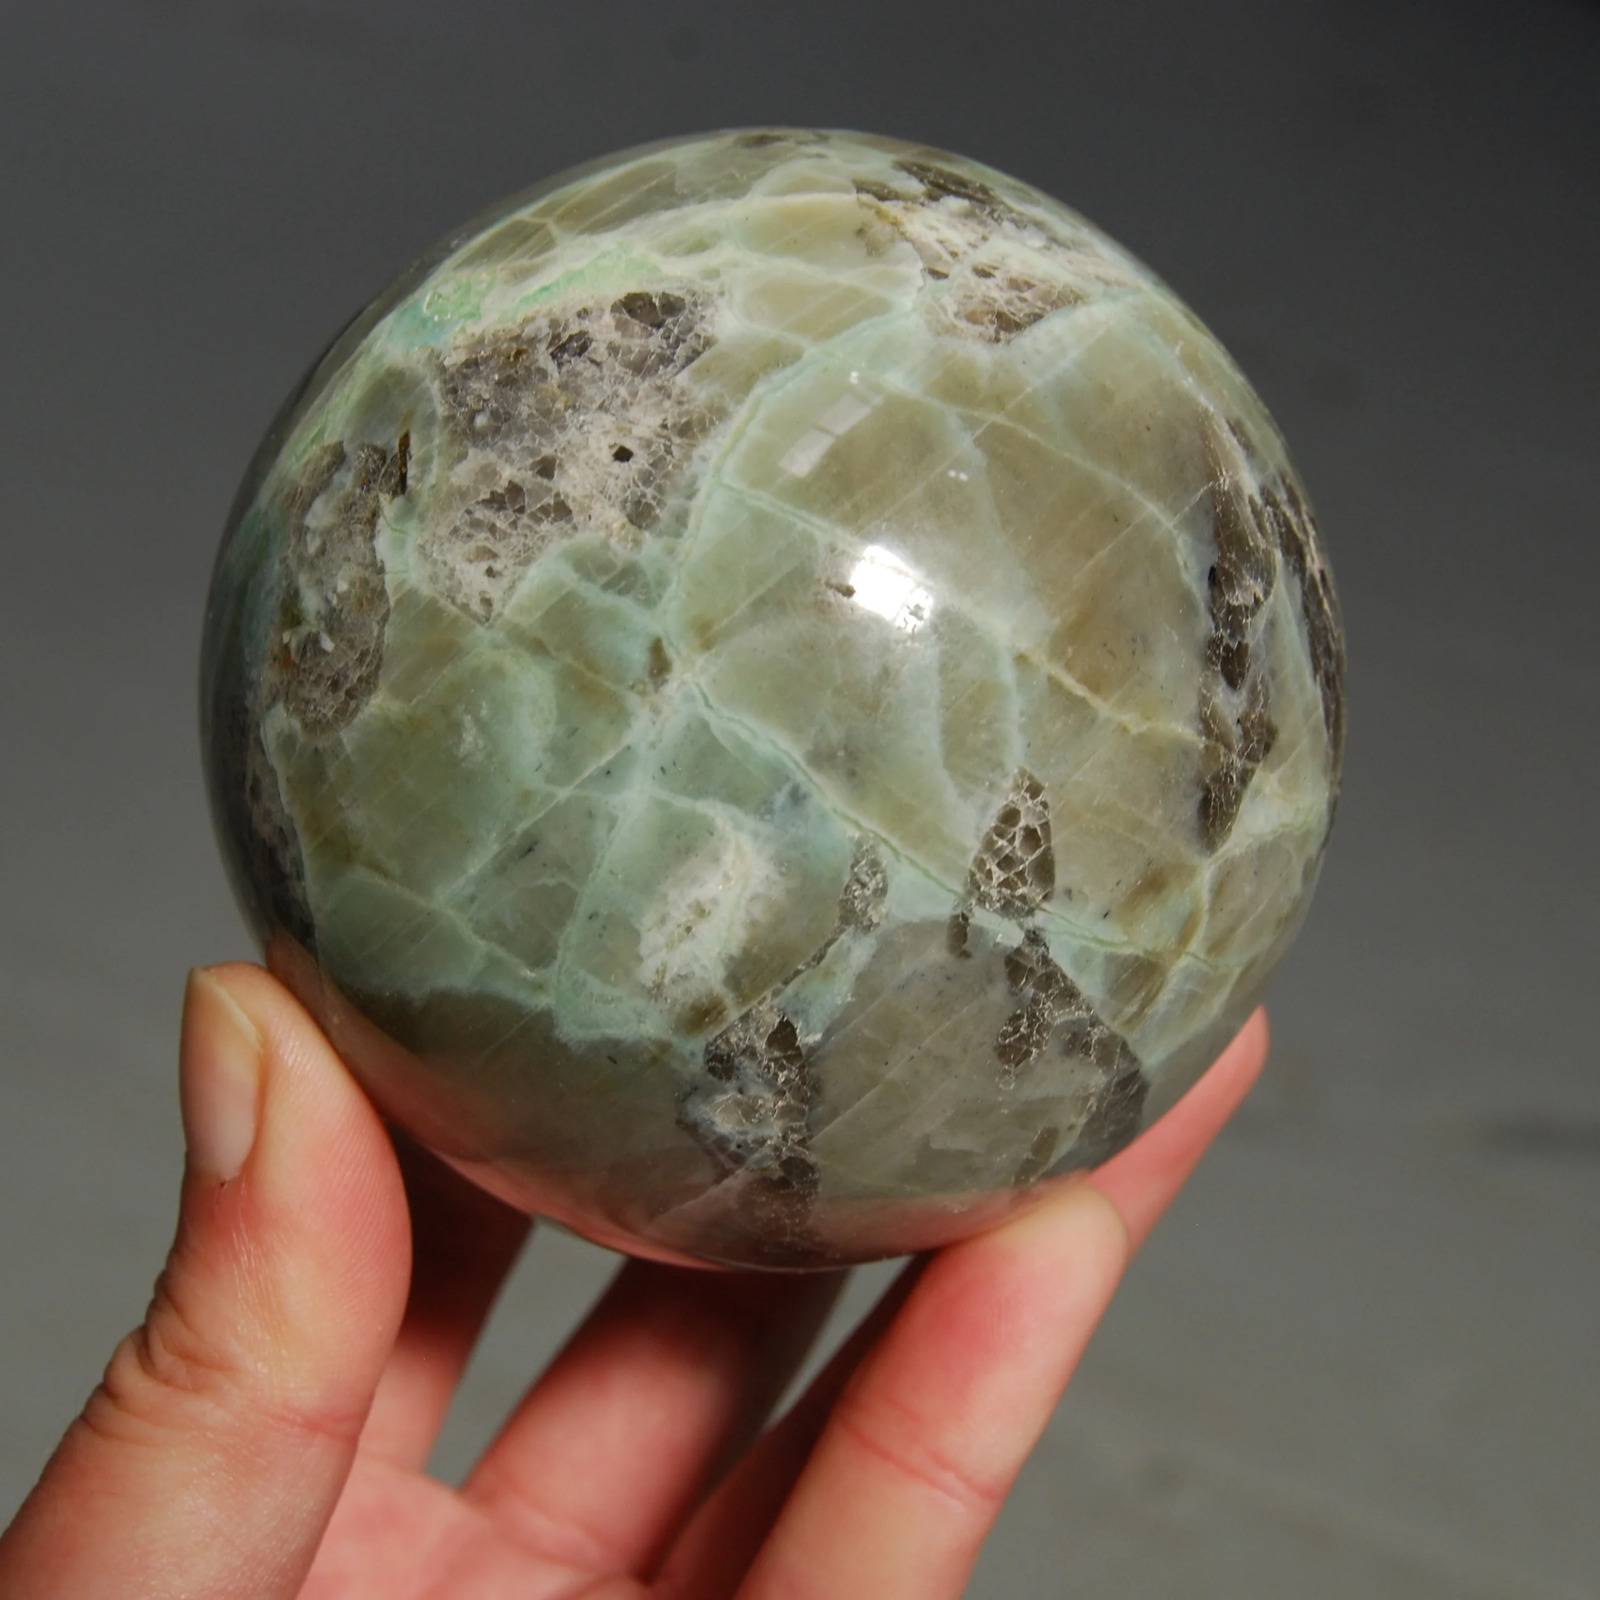 SALE was 110 | 3.5in Large Garnierite Crystal Sphere Polished Crystal Ball 1.9LB